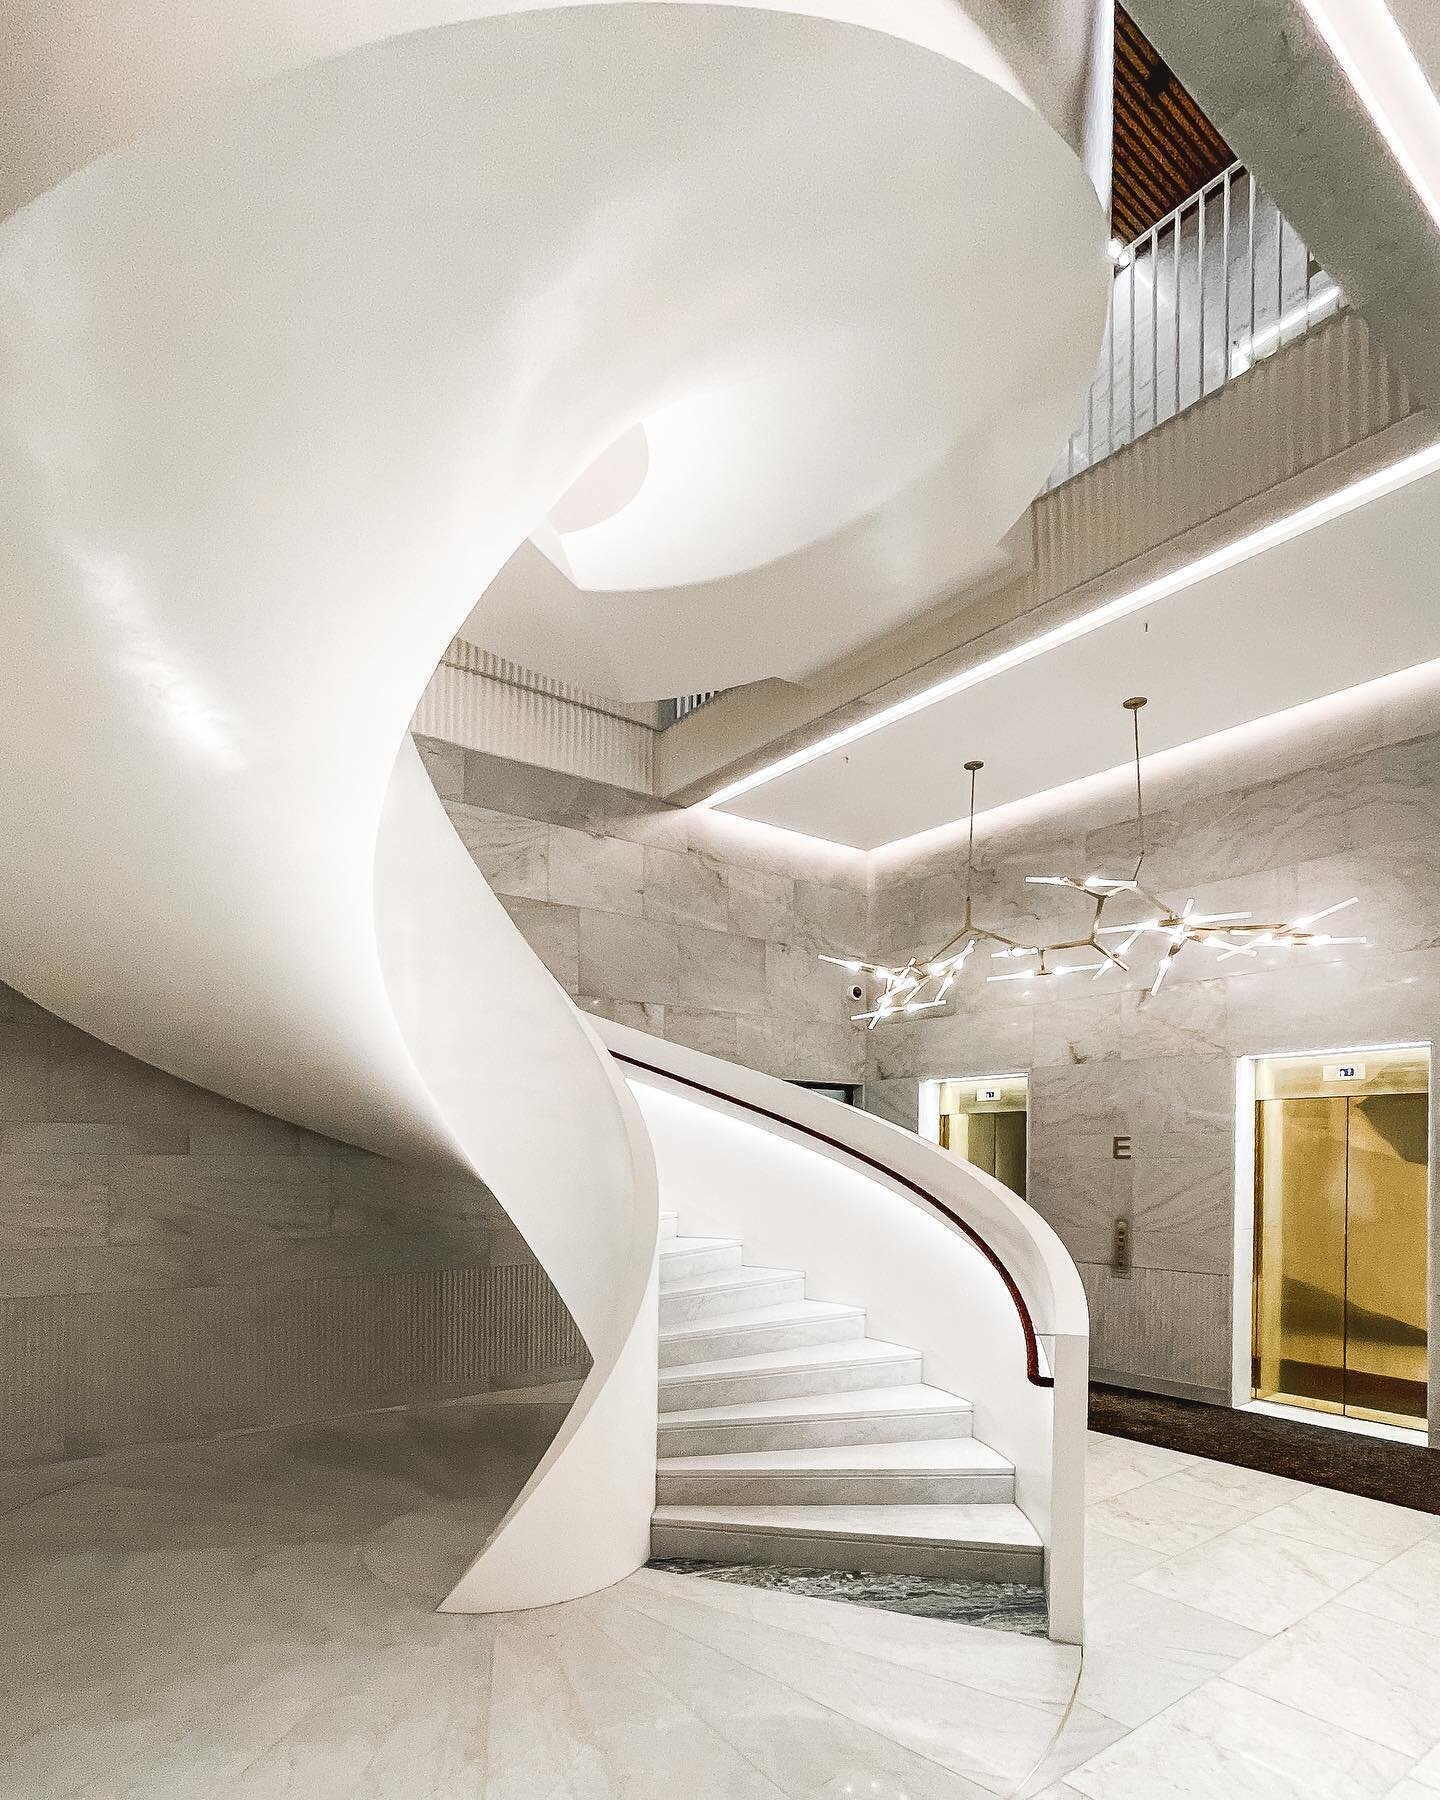 This was a 7 level staircase project in famous and historical Biblioteksgatan 9, in the center of Stockholm in Sweden. This building have burned down recently and renovated again for fancy office premises and luxury brand shops on the ground floor. 
